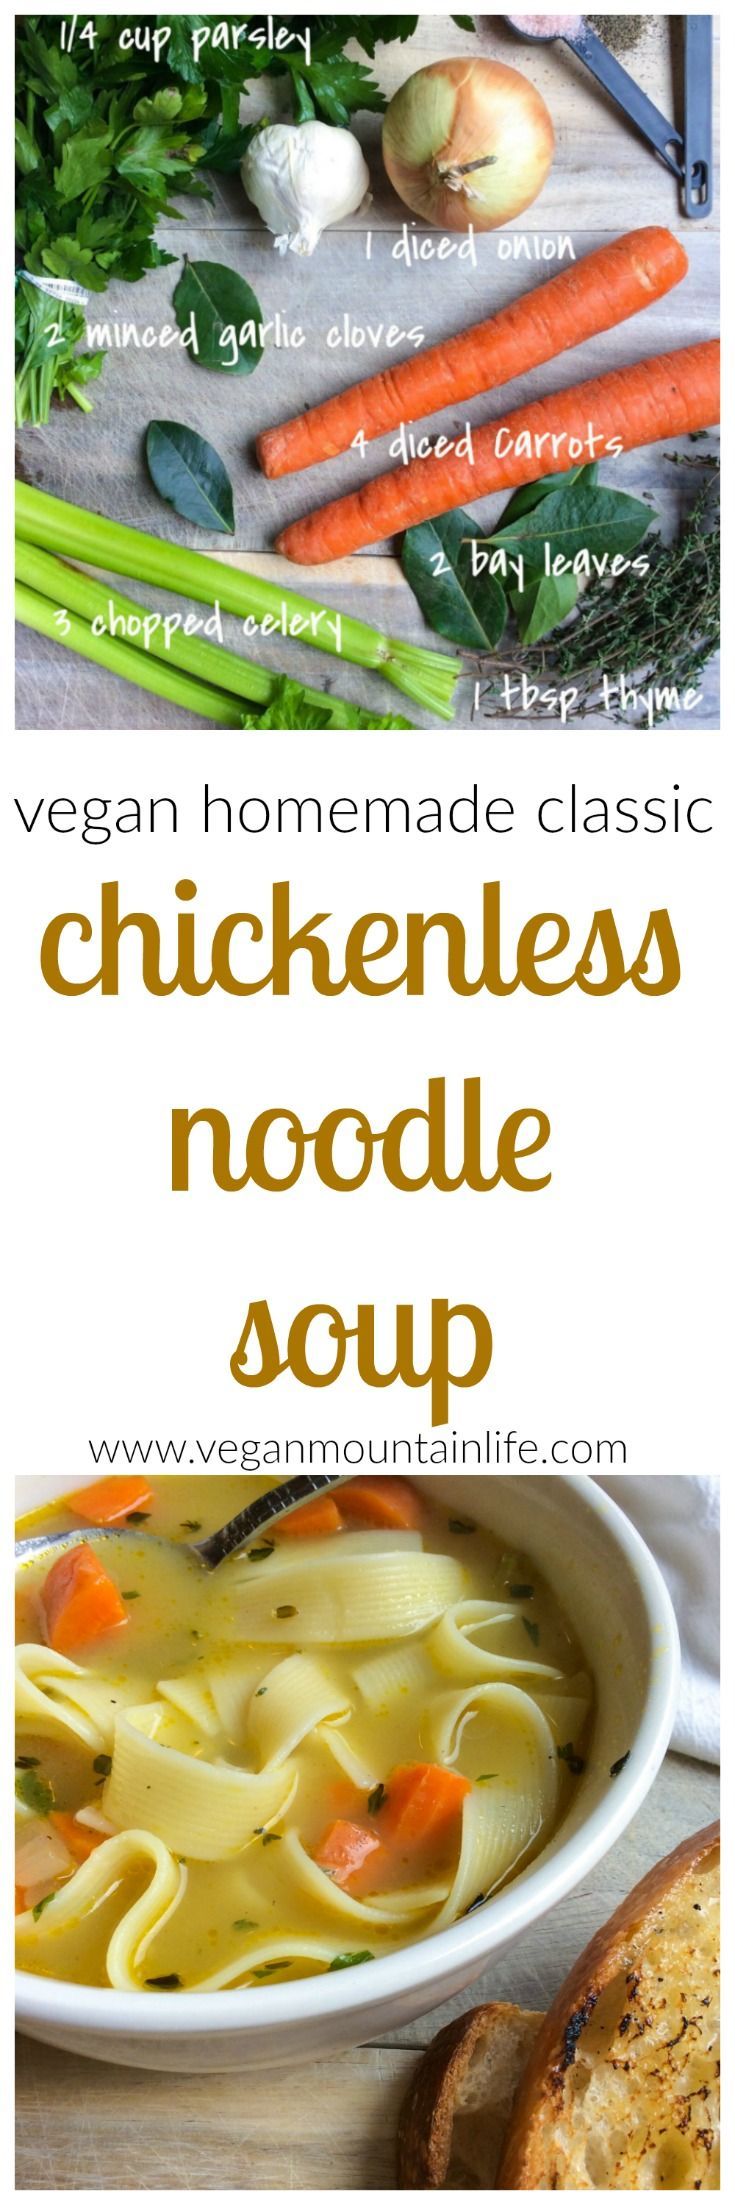 Easy, healthy, classic homemade vegan chicken noodle soup!